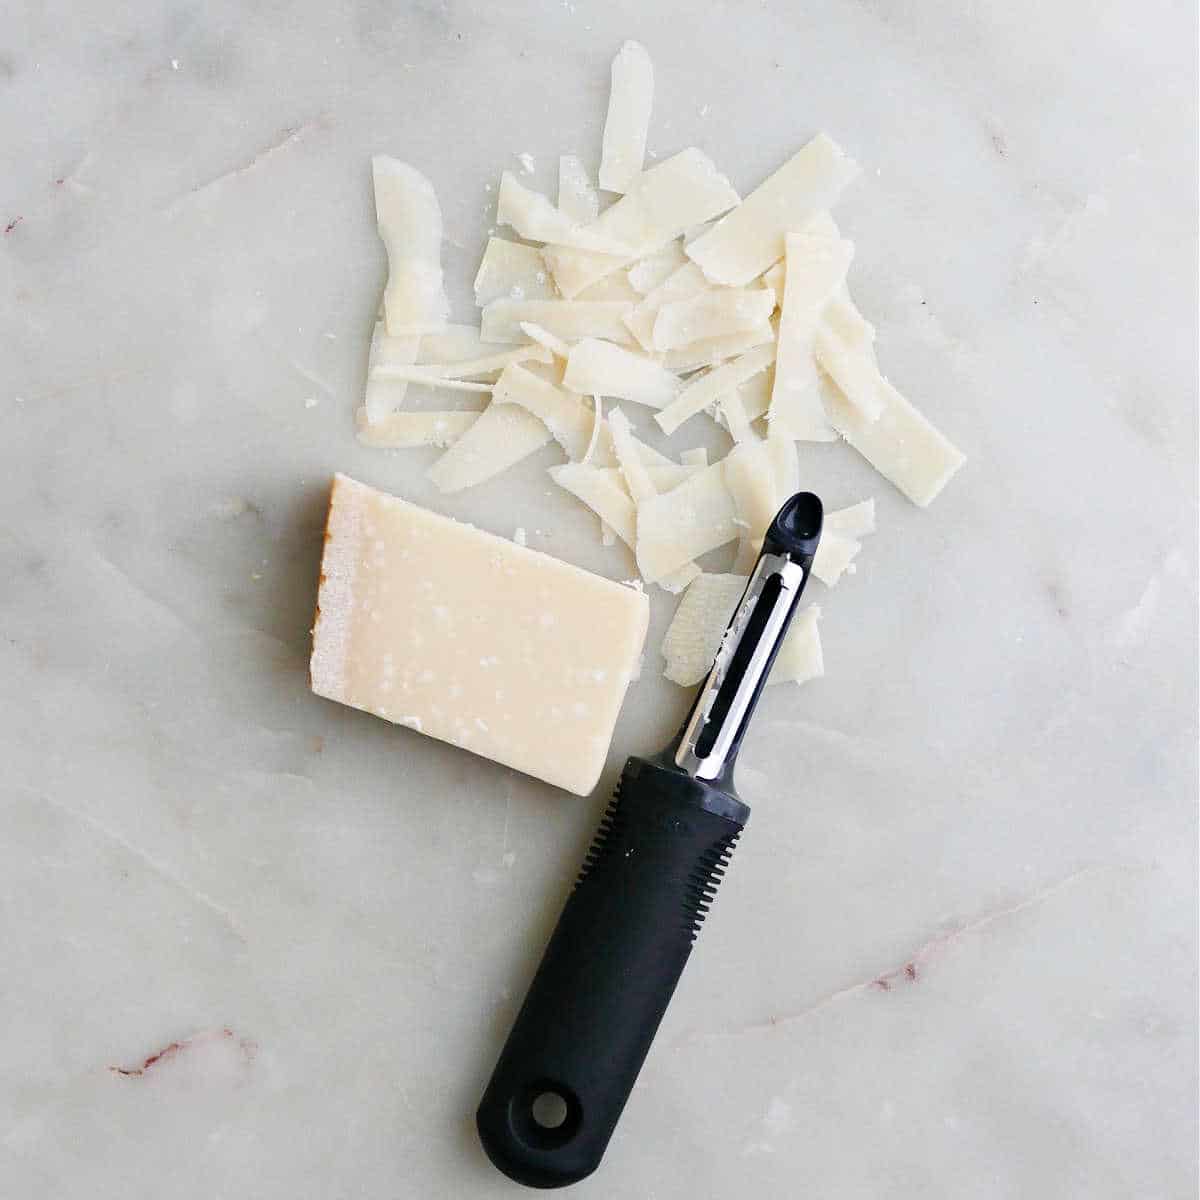 block of parmesan with shavings next to a swivel peeler